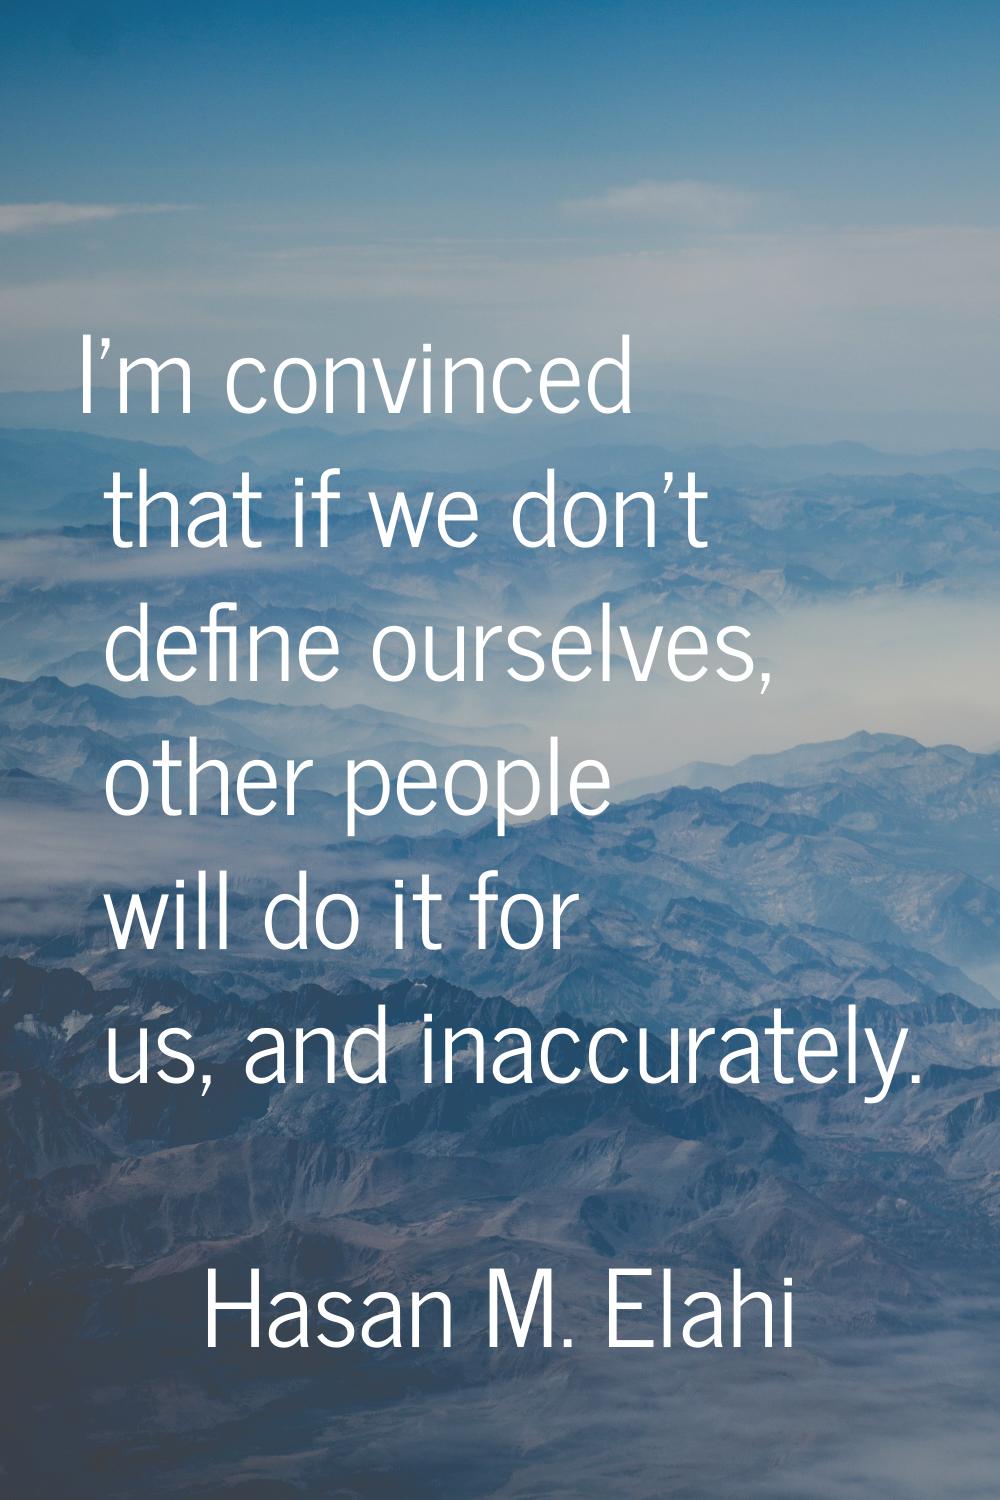 I'm convinced that if we don't define ourselves, other people will do it for us, and inaccurately.